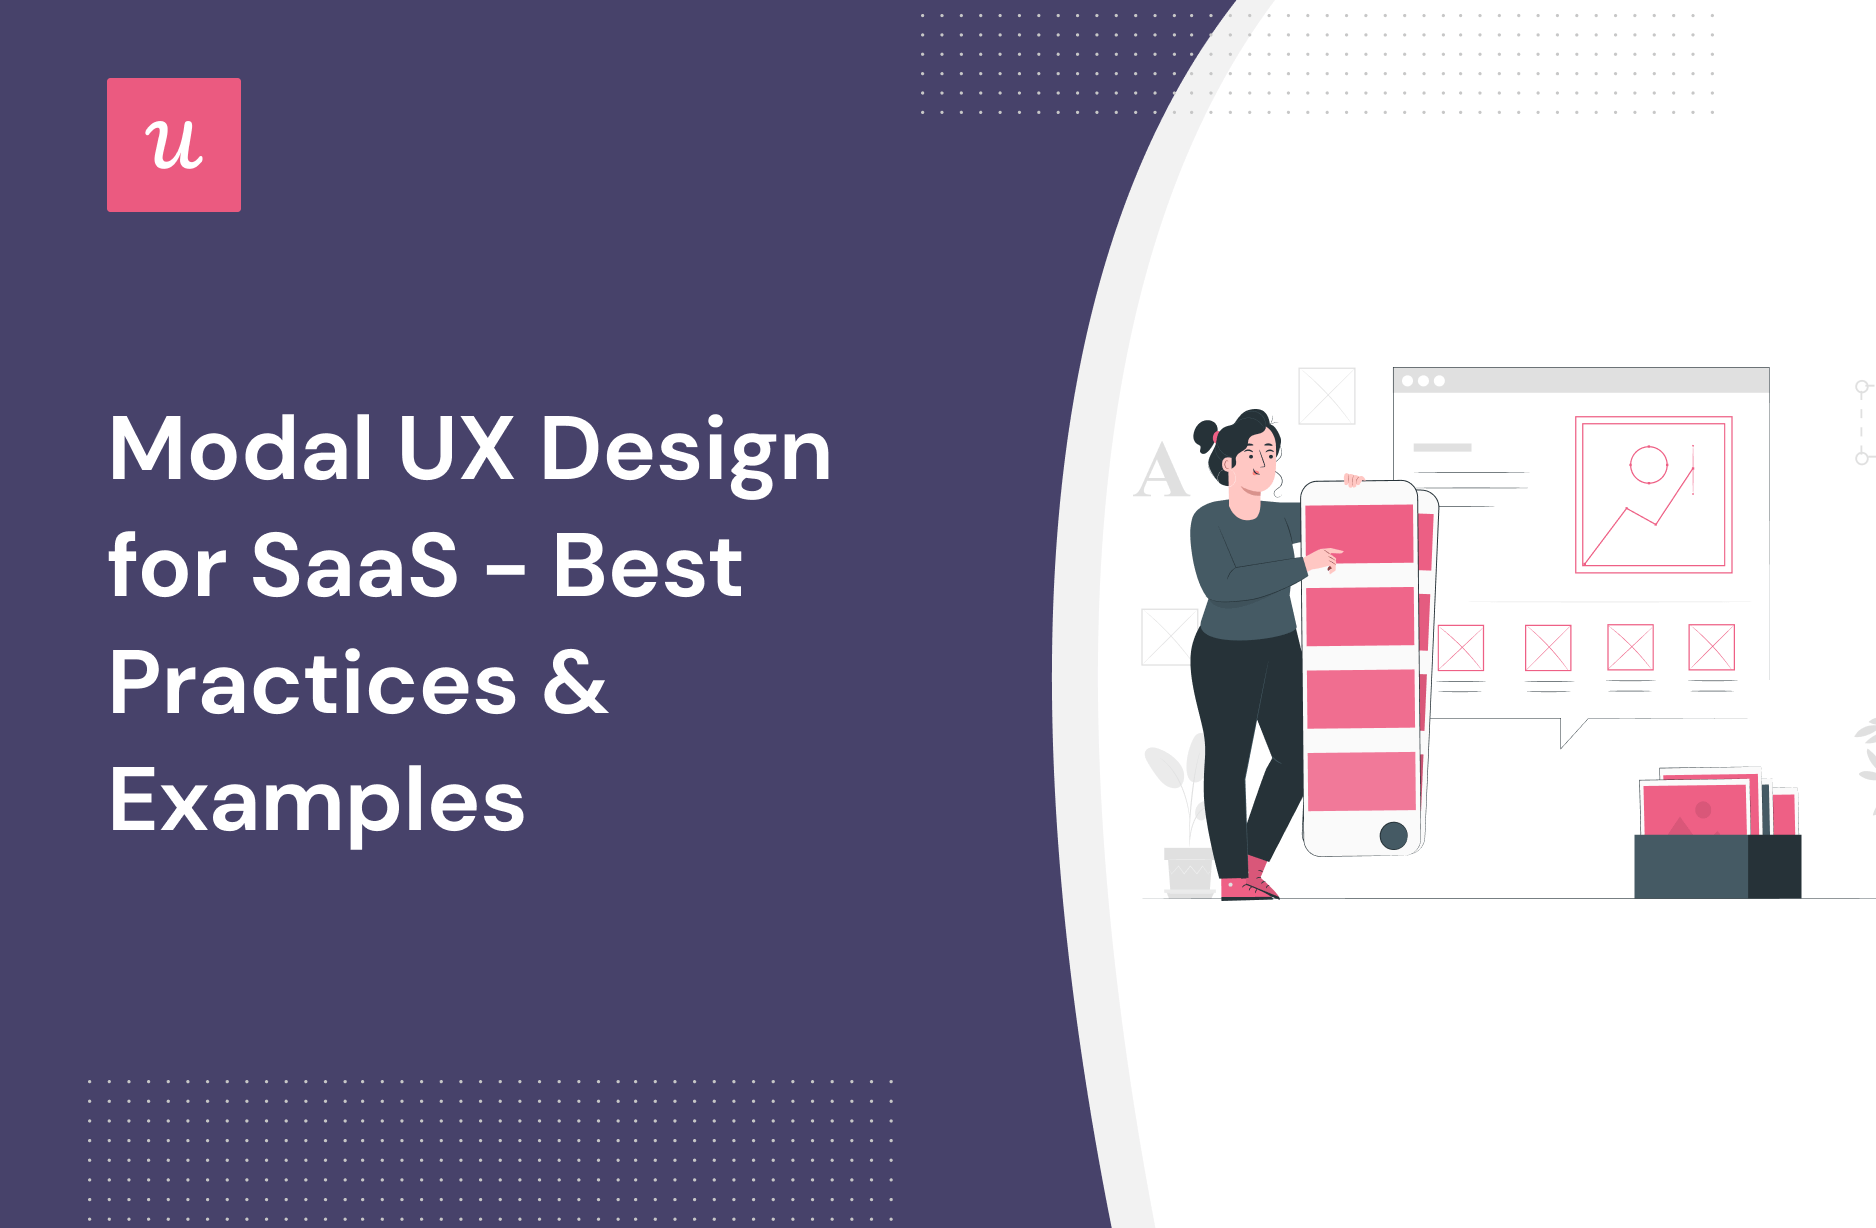 Modal UX Design for SaaS in 2023 - Best Practices & Examples